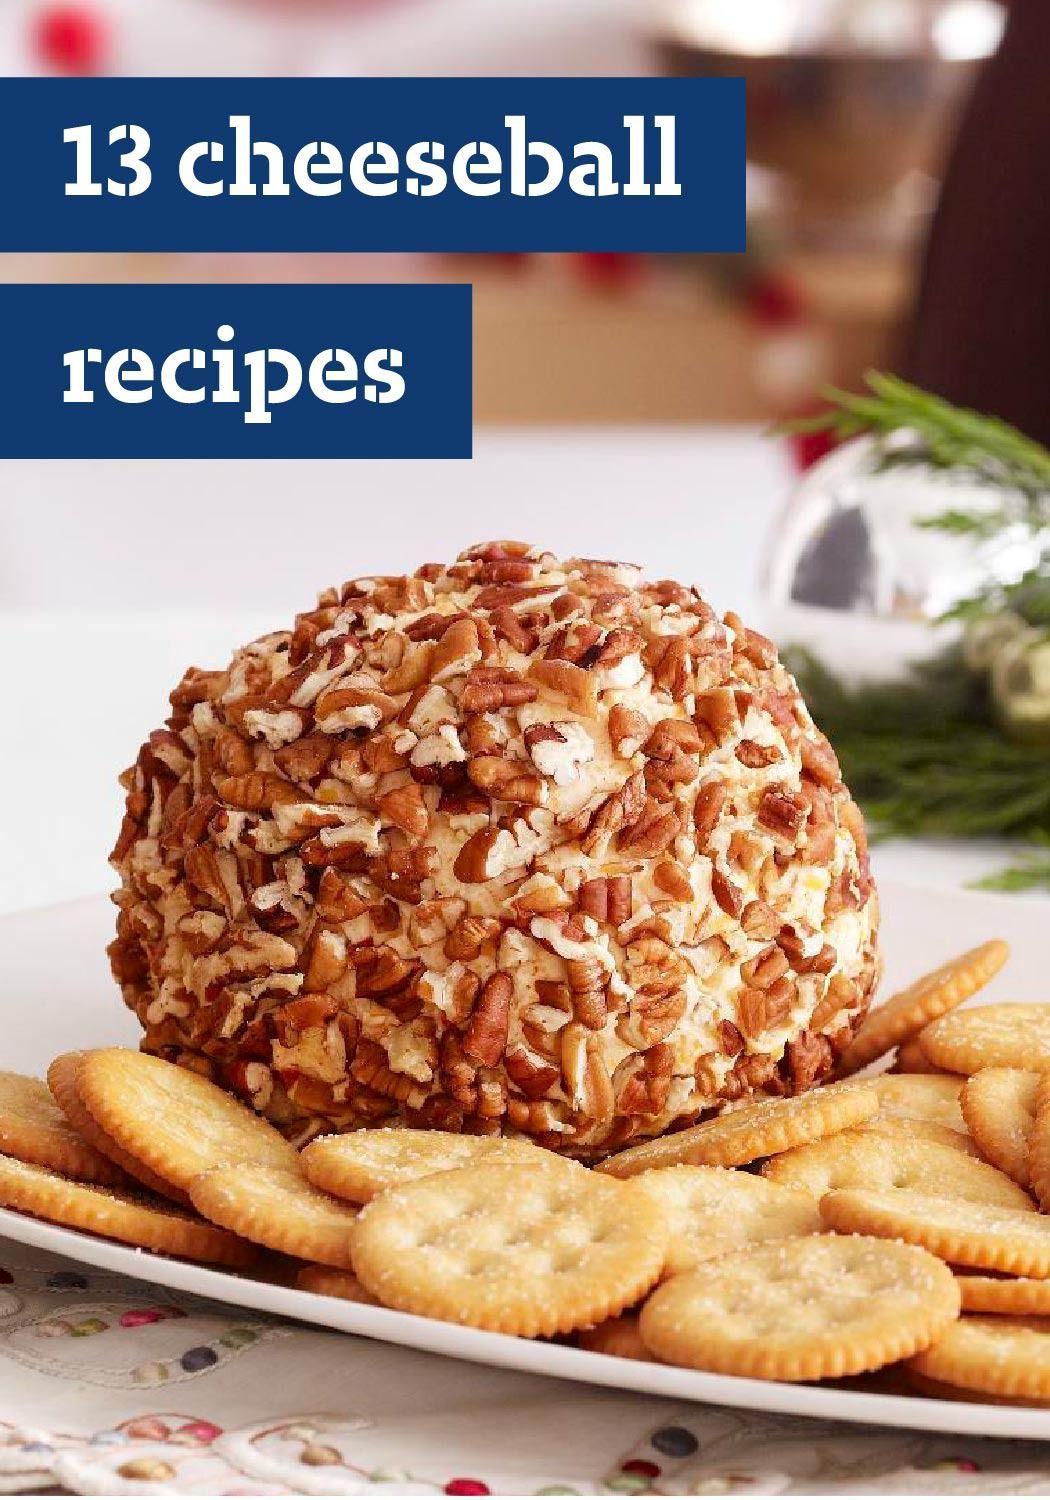 13 Cheeseball Recipes – Cheeseballs are one of the easiest cold appetizers to prepare and are sure to please the holiday crowd.